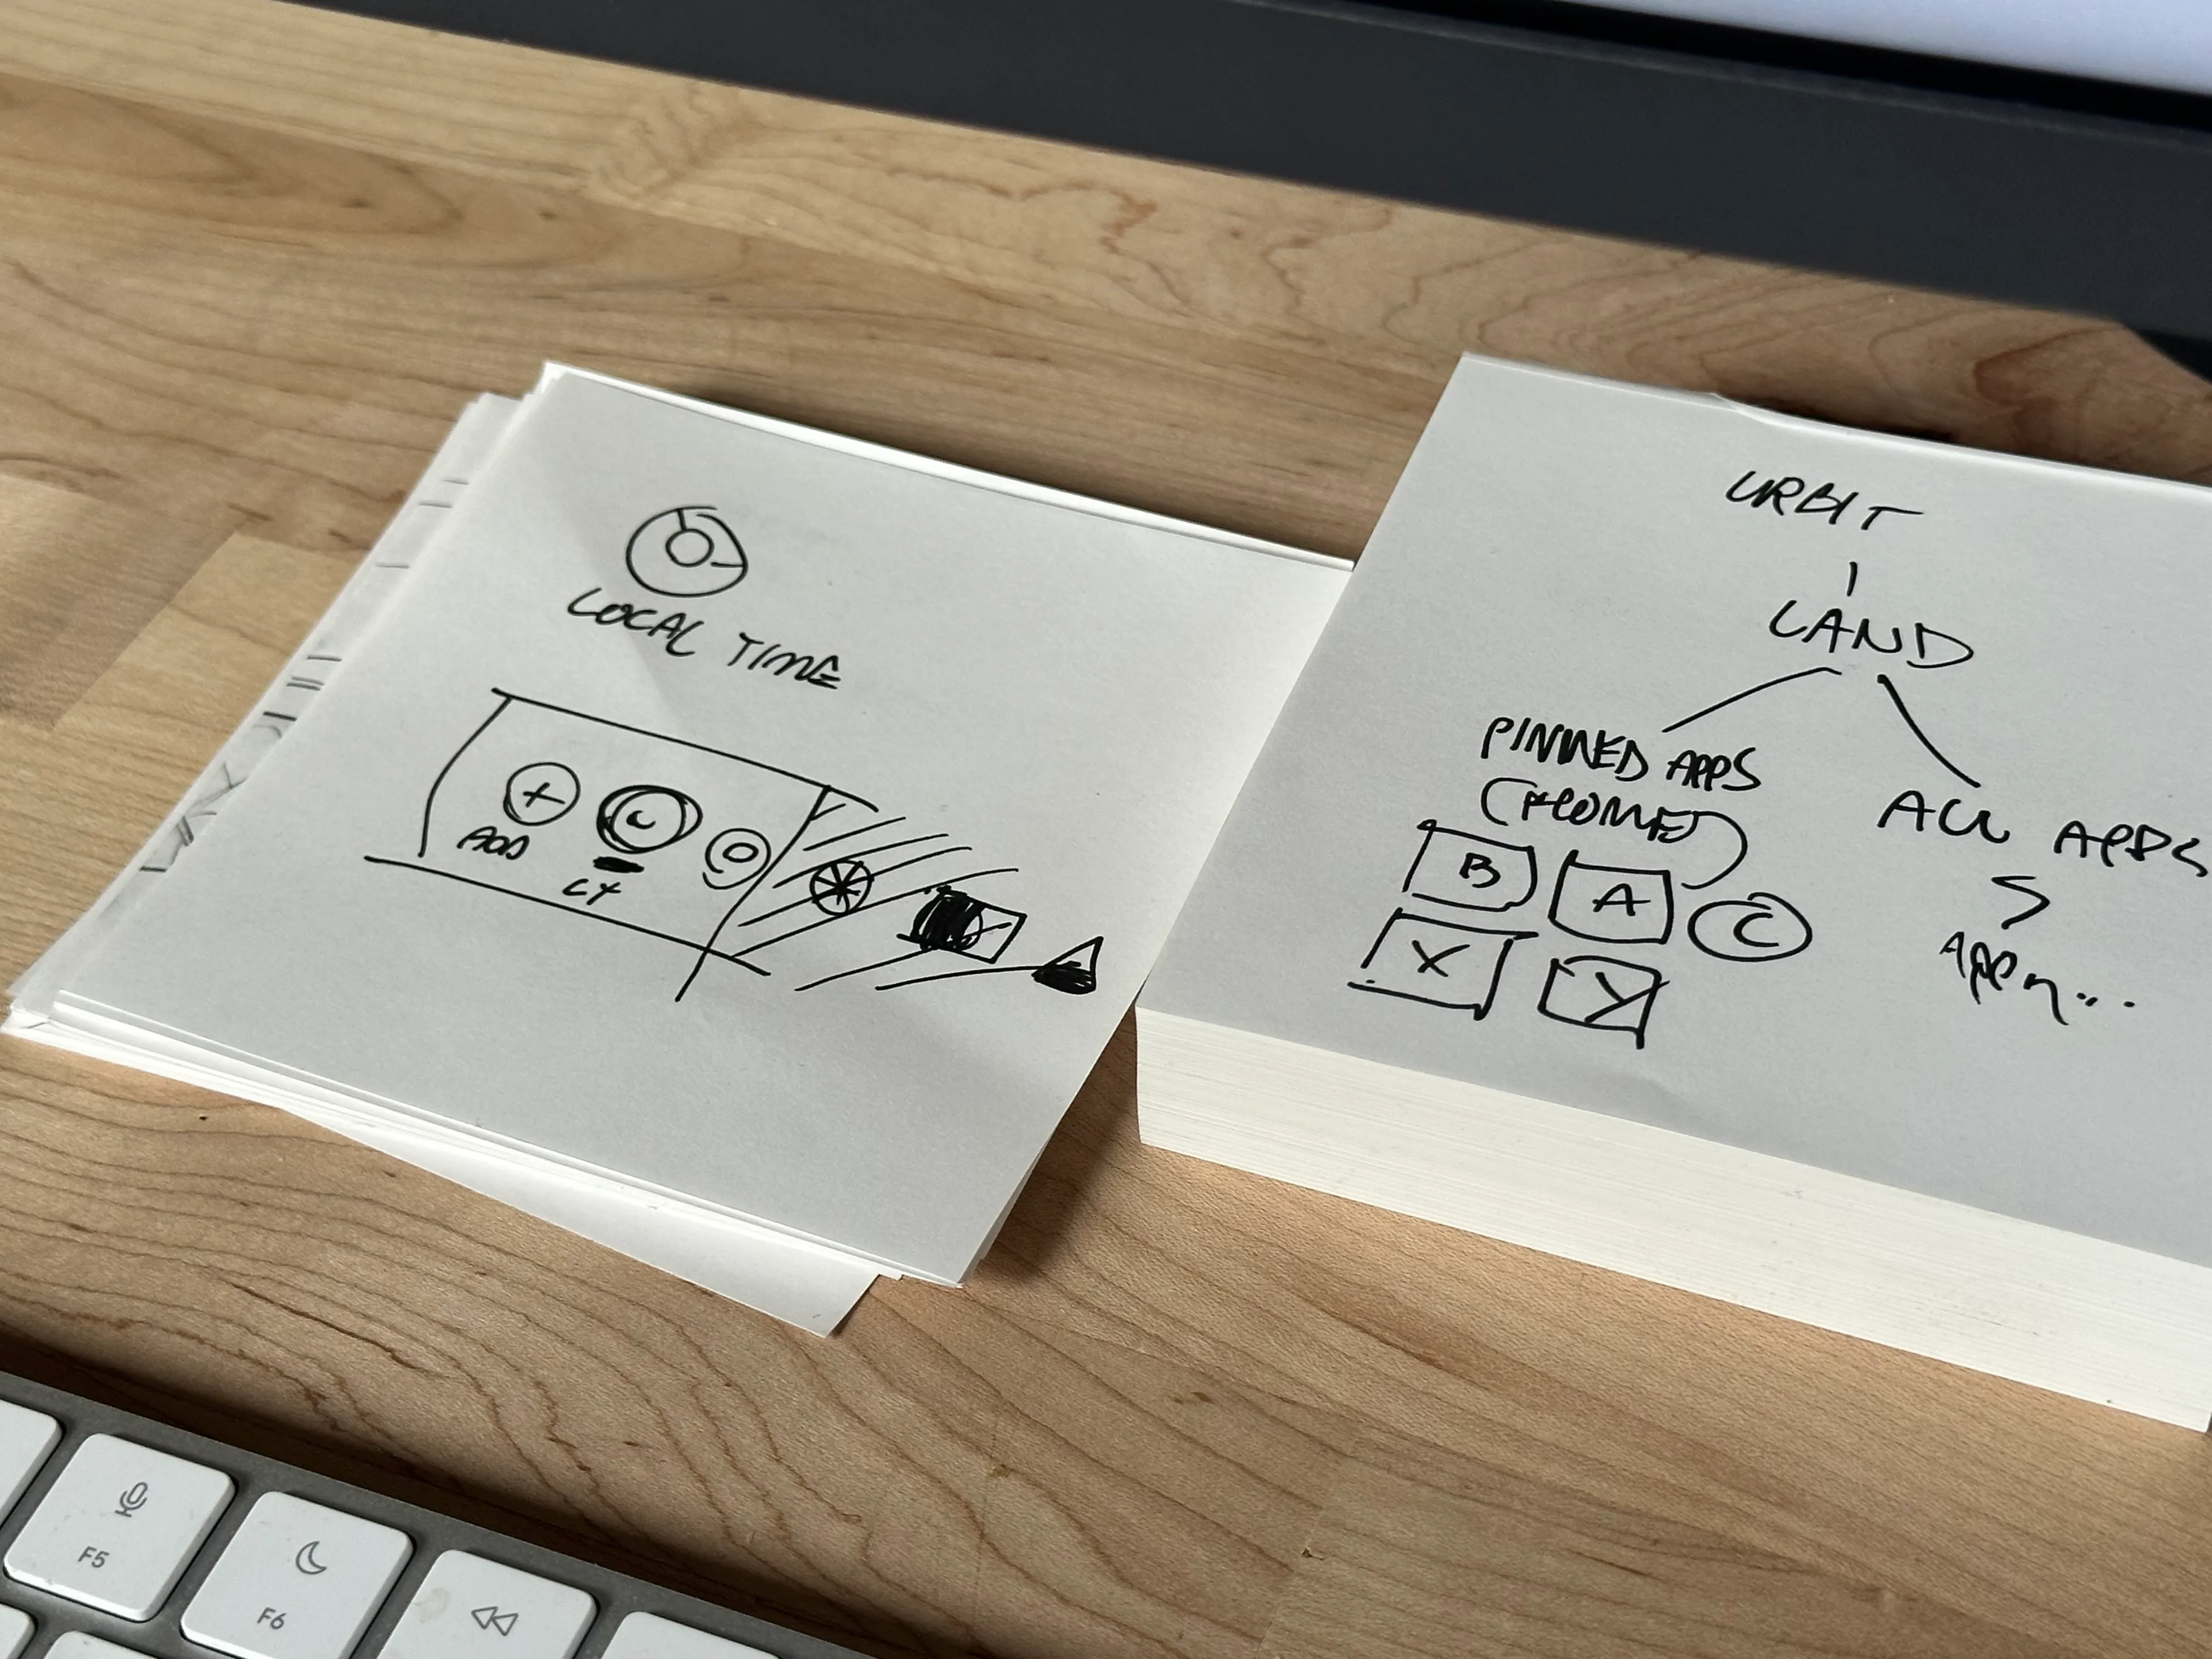 A pad of paper showcasing some sketching about Surface's tab/widget model